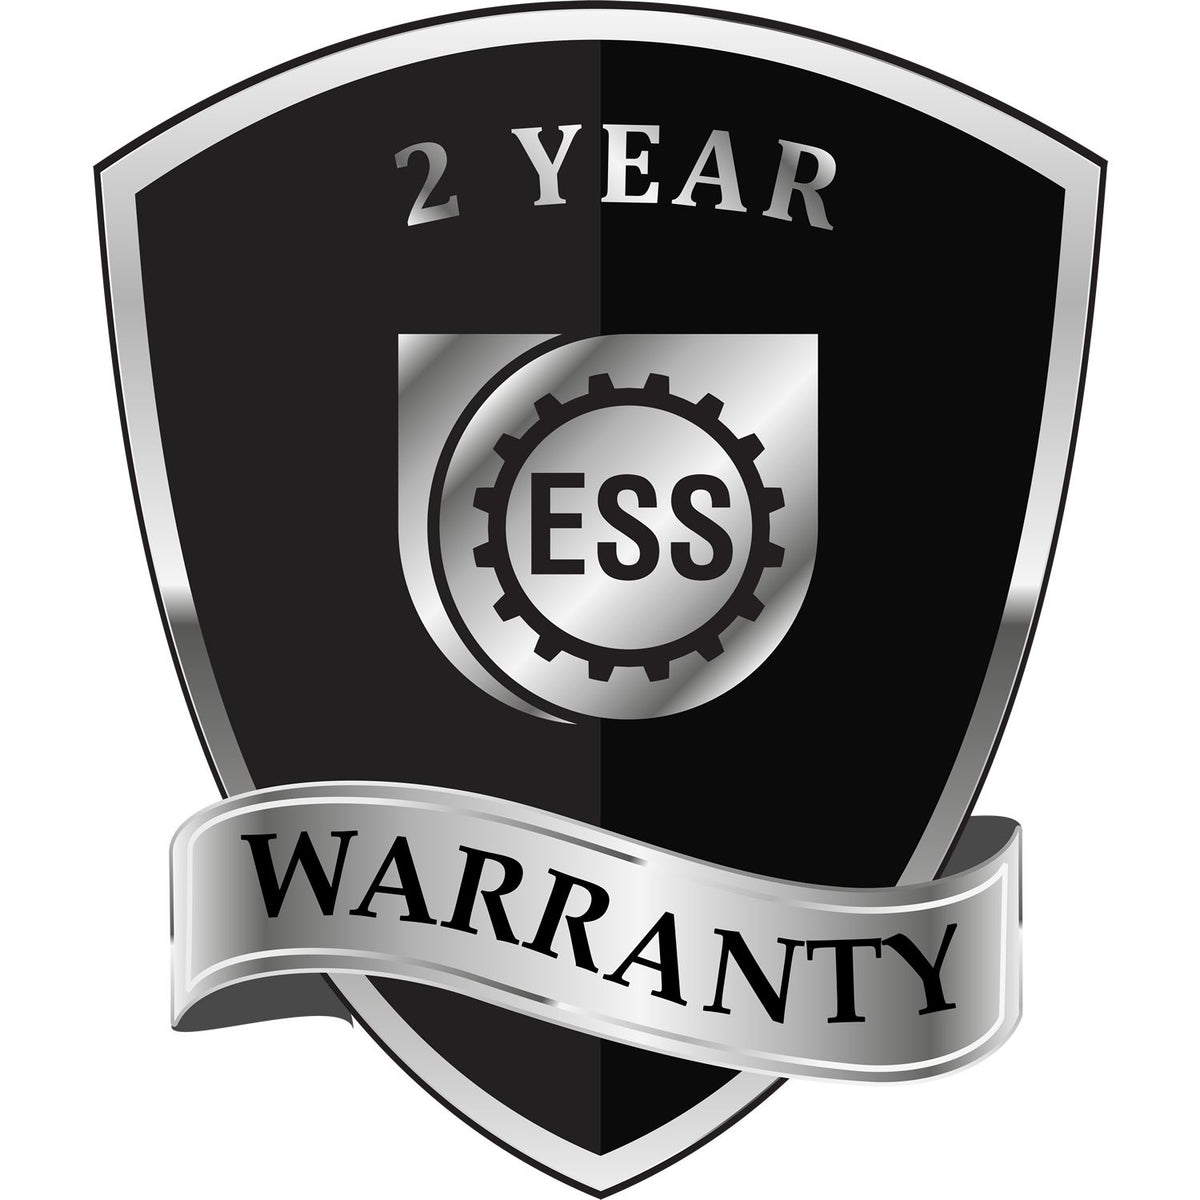 A badge or emblem showing a warranty icon for the Long Reach Nevada PE Seal